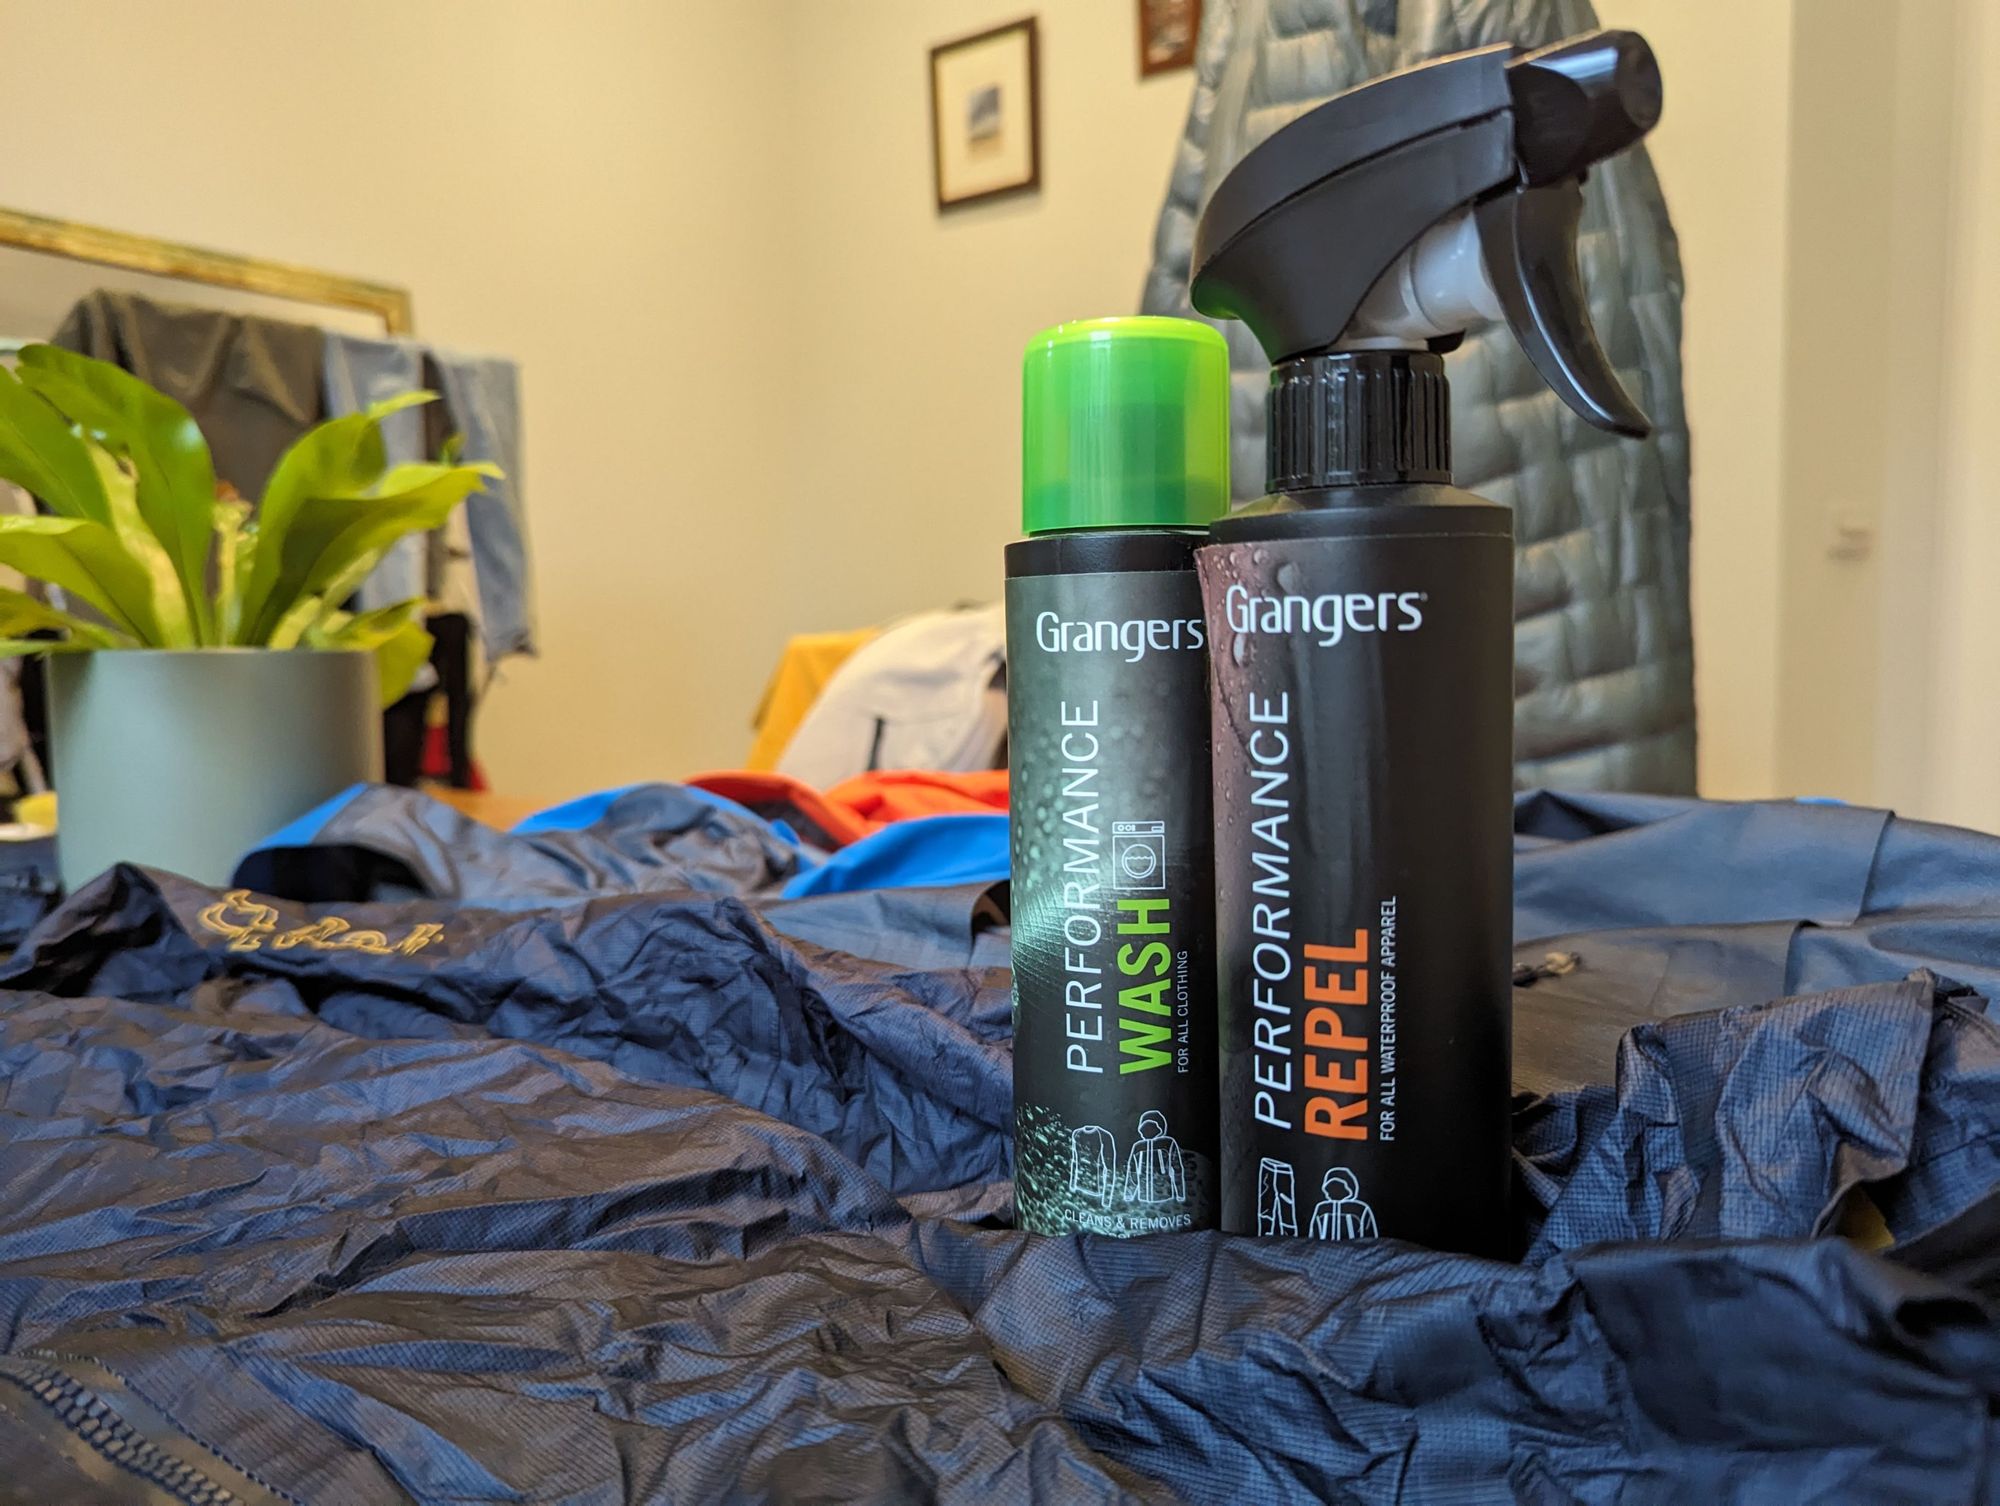 A wash-in cleaner for waterproof jackets, left, and a waterproofing spray, on the right. Photo: Stuart Kenny